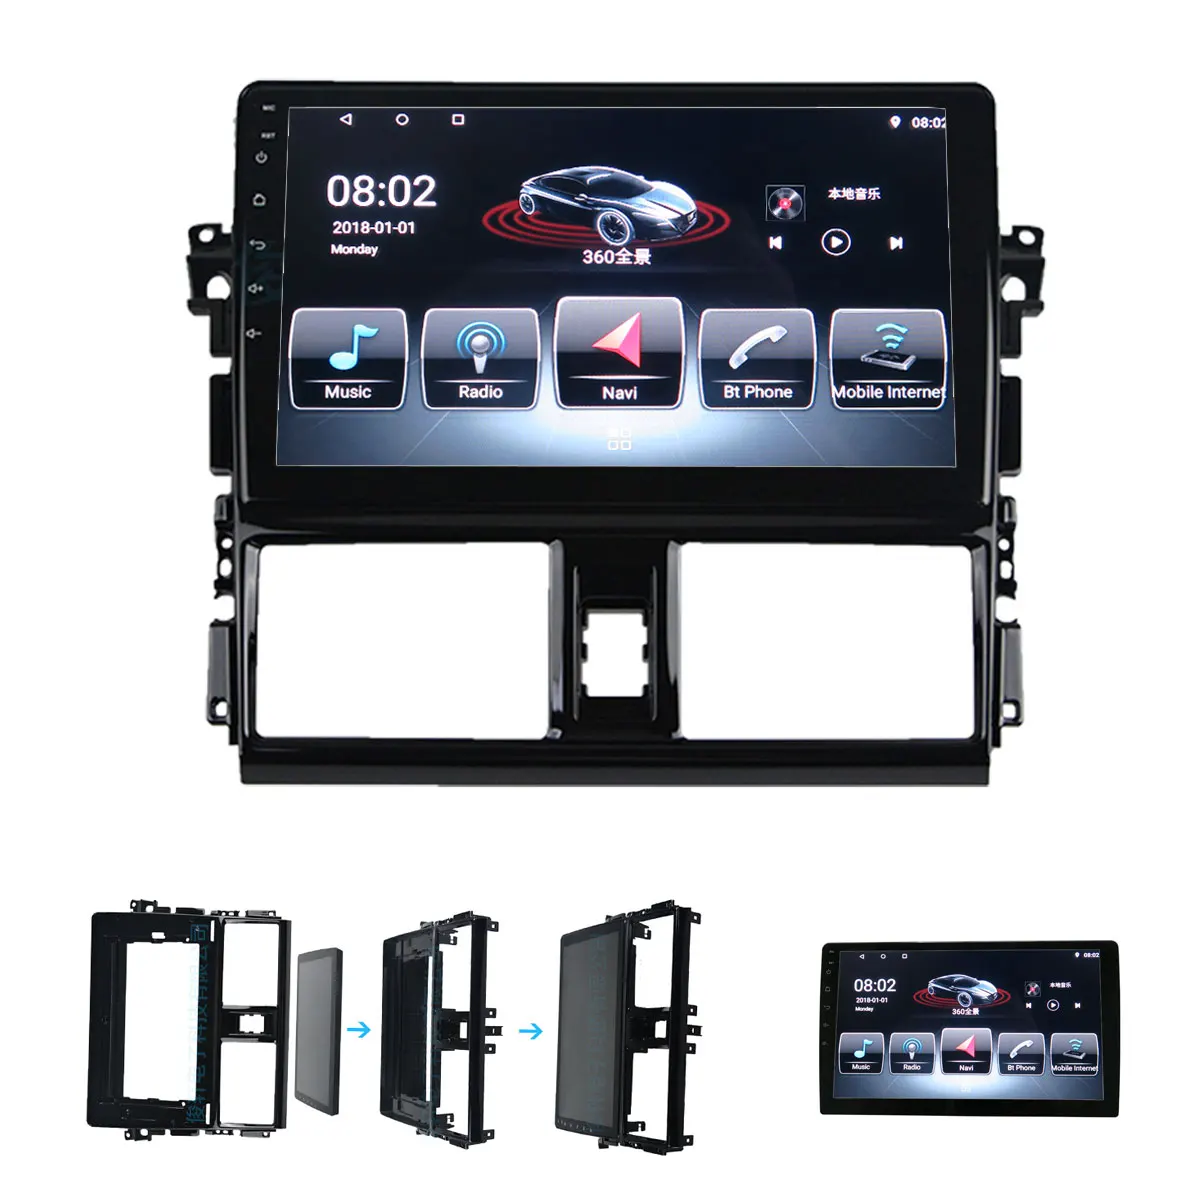 Top Android Car Multimedia and 360 degree Bird View Panoramic System for TOYOTA VOIS 2013 with GPS BT Radio Wifi  4 way camera 0